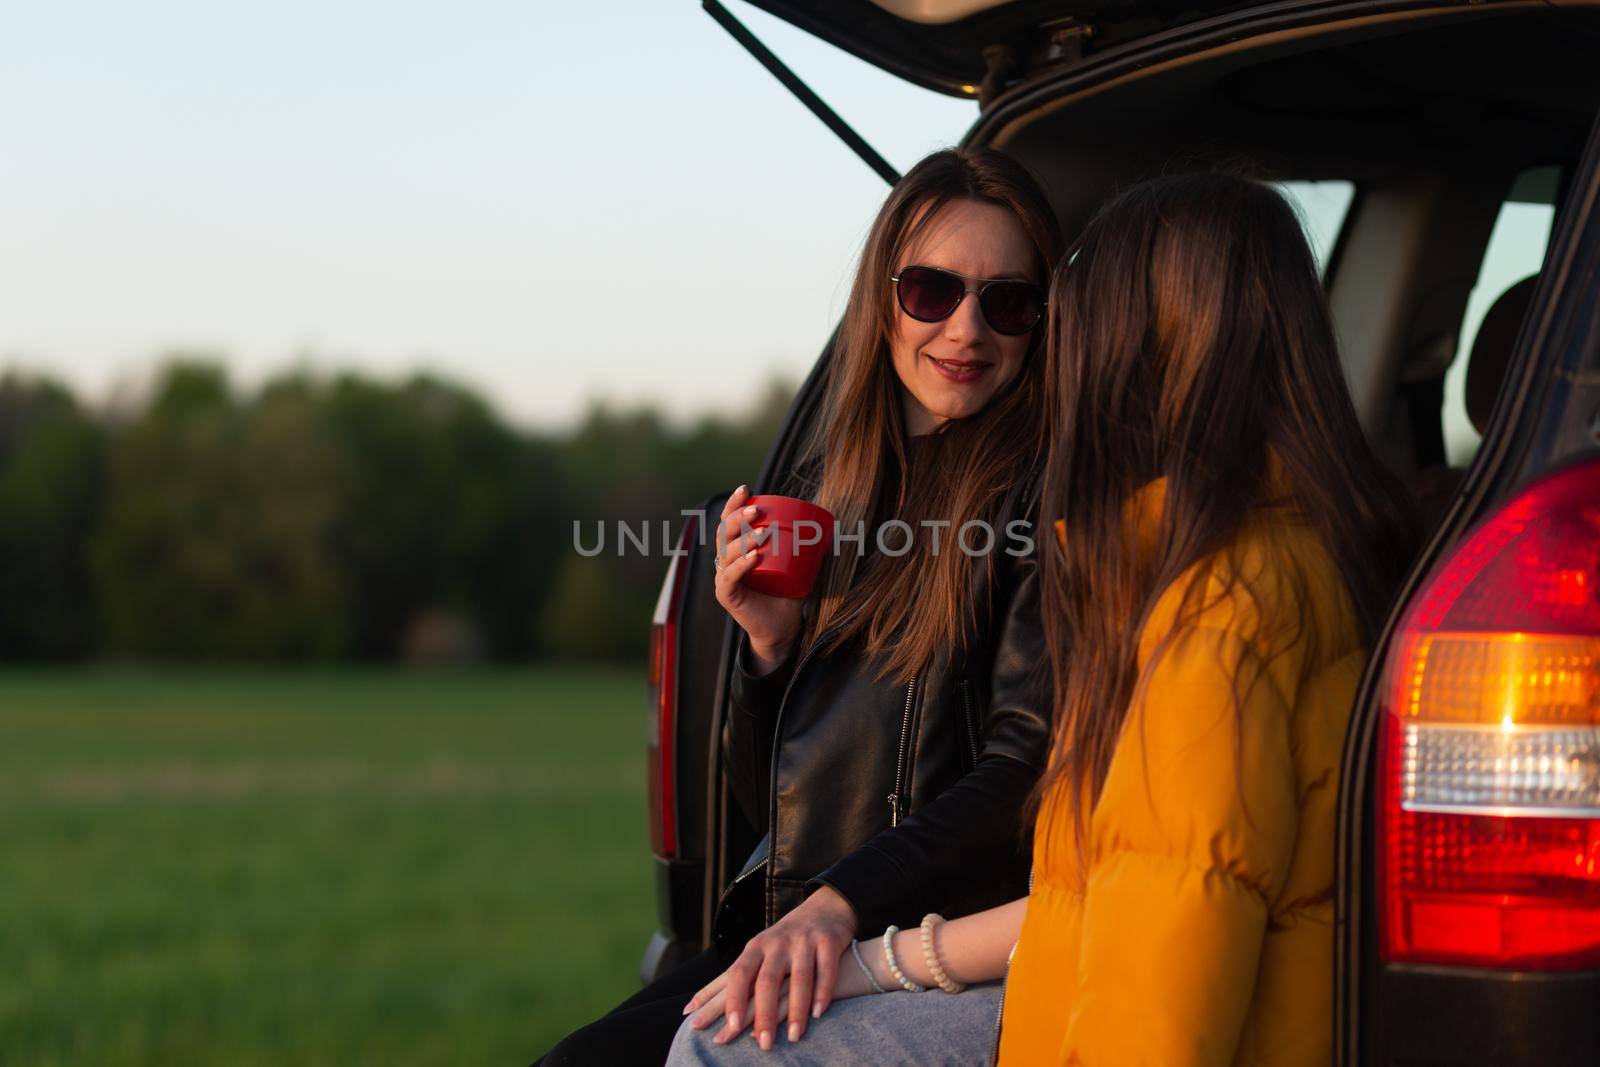 Mother and daughter camping on a hill and admiring the sunset while sitting in the car trunk